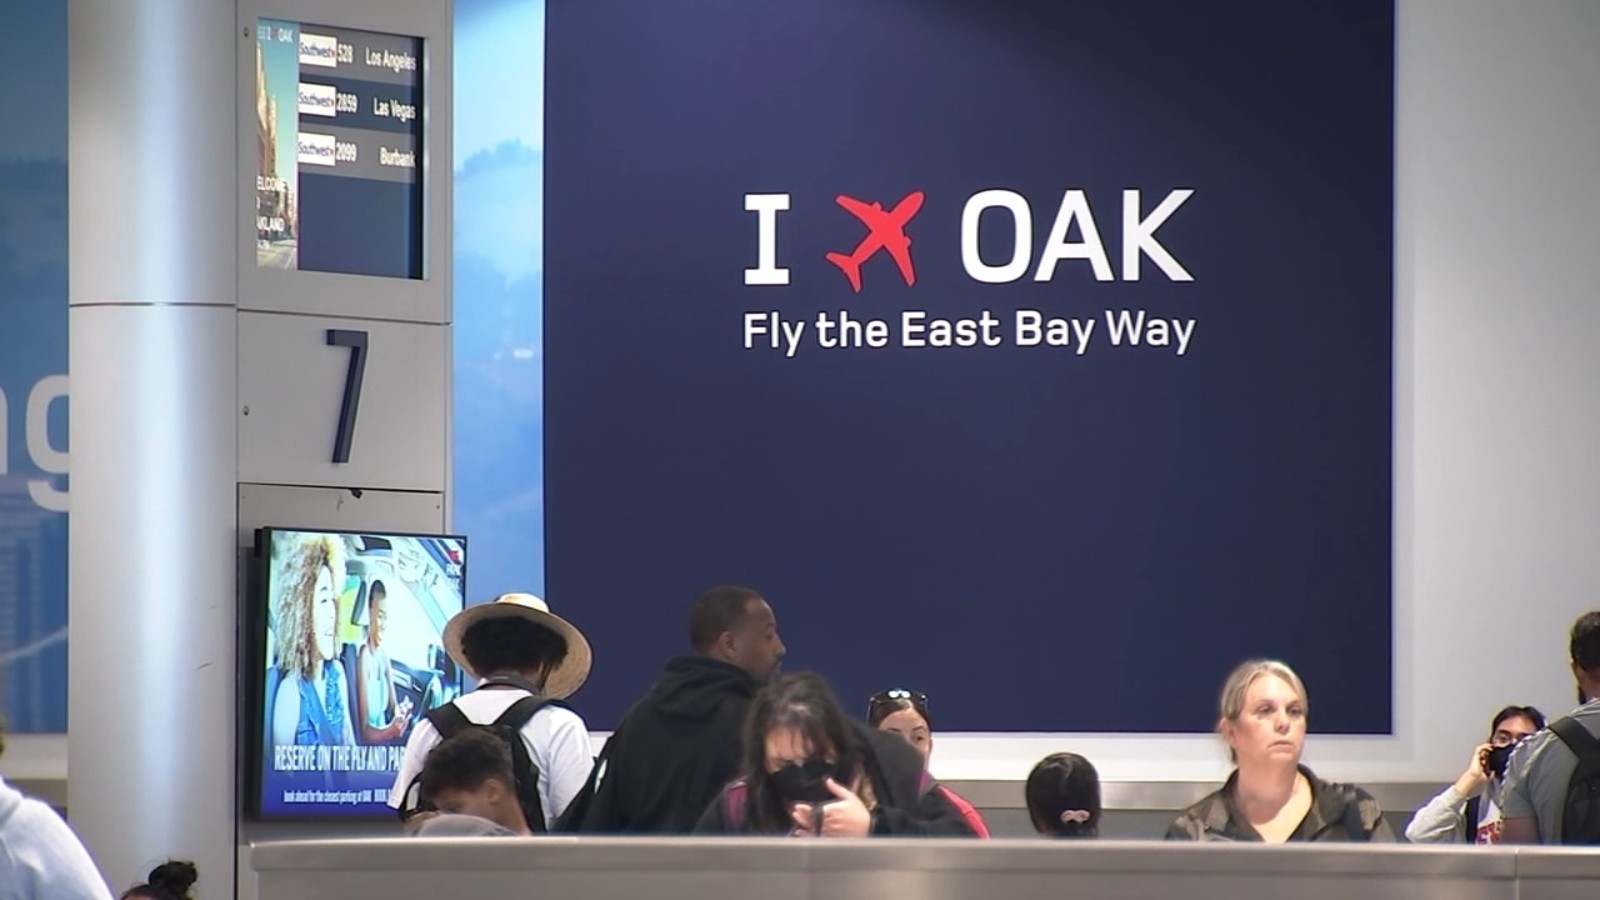 Final vote on Oakland airport name change happening Thursday as SF continues lawsuit threats